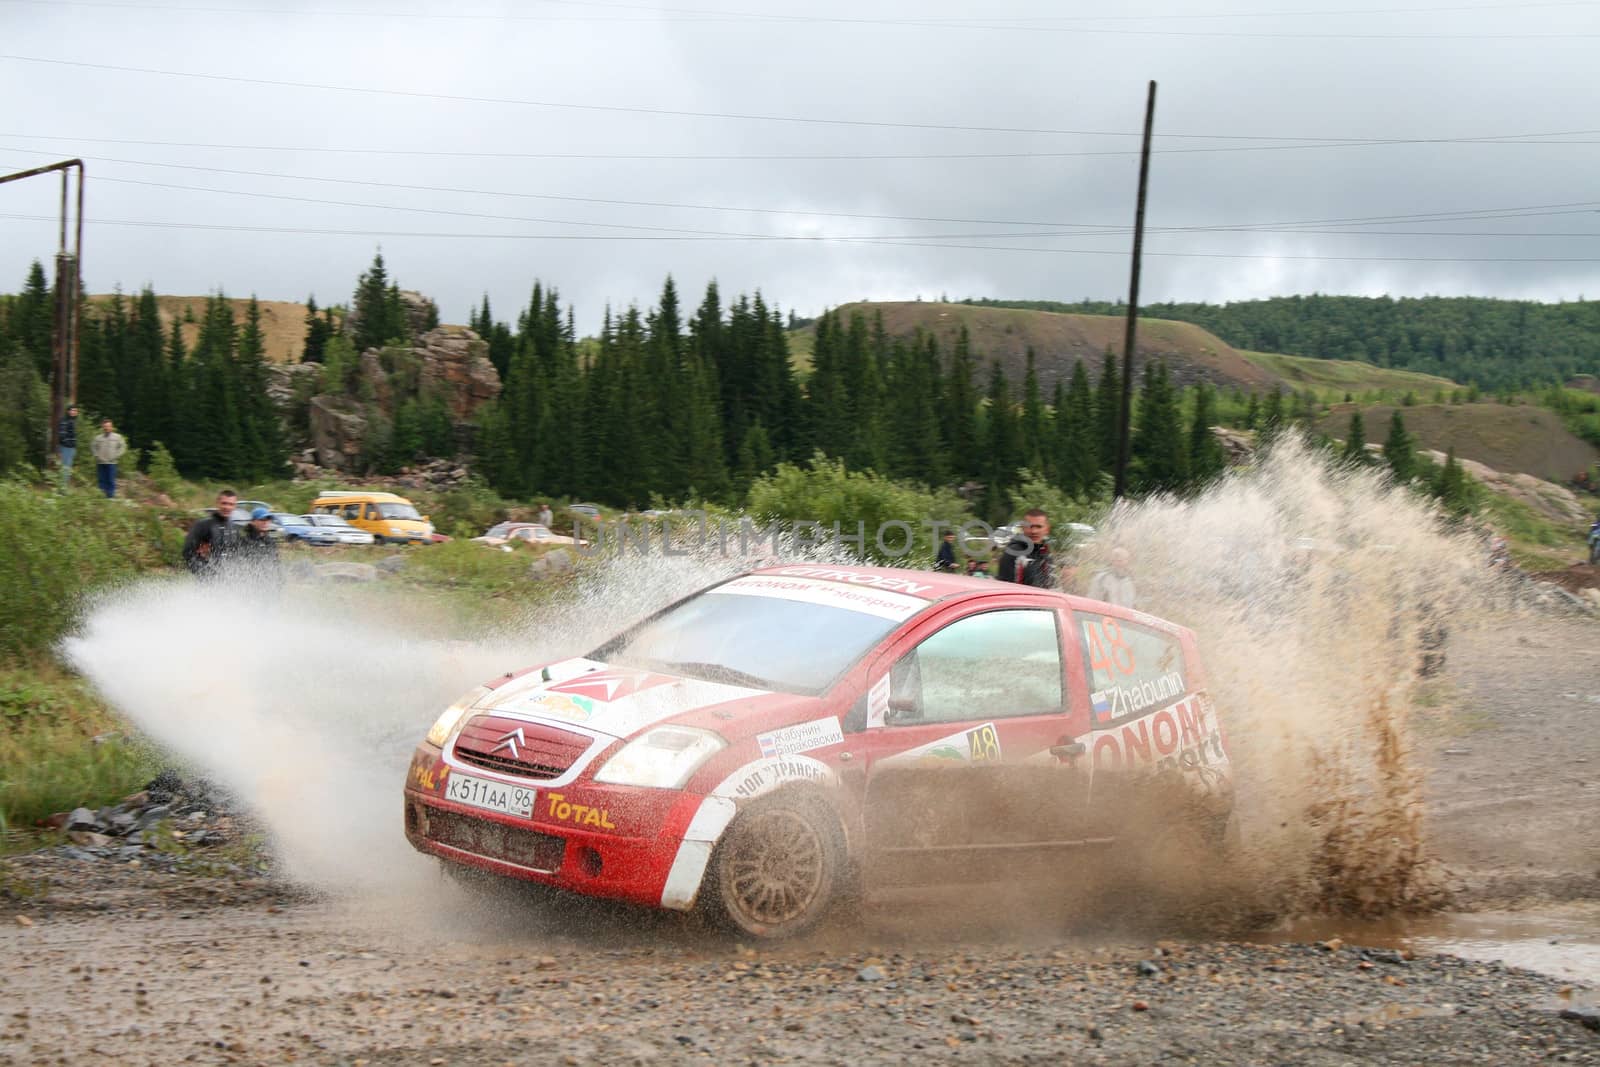 BAKAL, RUSSIA - AUGUST 8: Stanislav Zhabunin's Citroen C2 (No. 48) competes at the Annual Rally Southern Ural on August 8, 2009 in Bakal, Satka district, Chelyabinsk region, Russia.